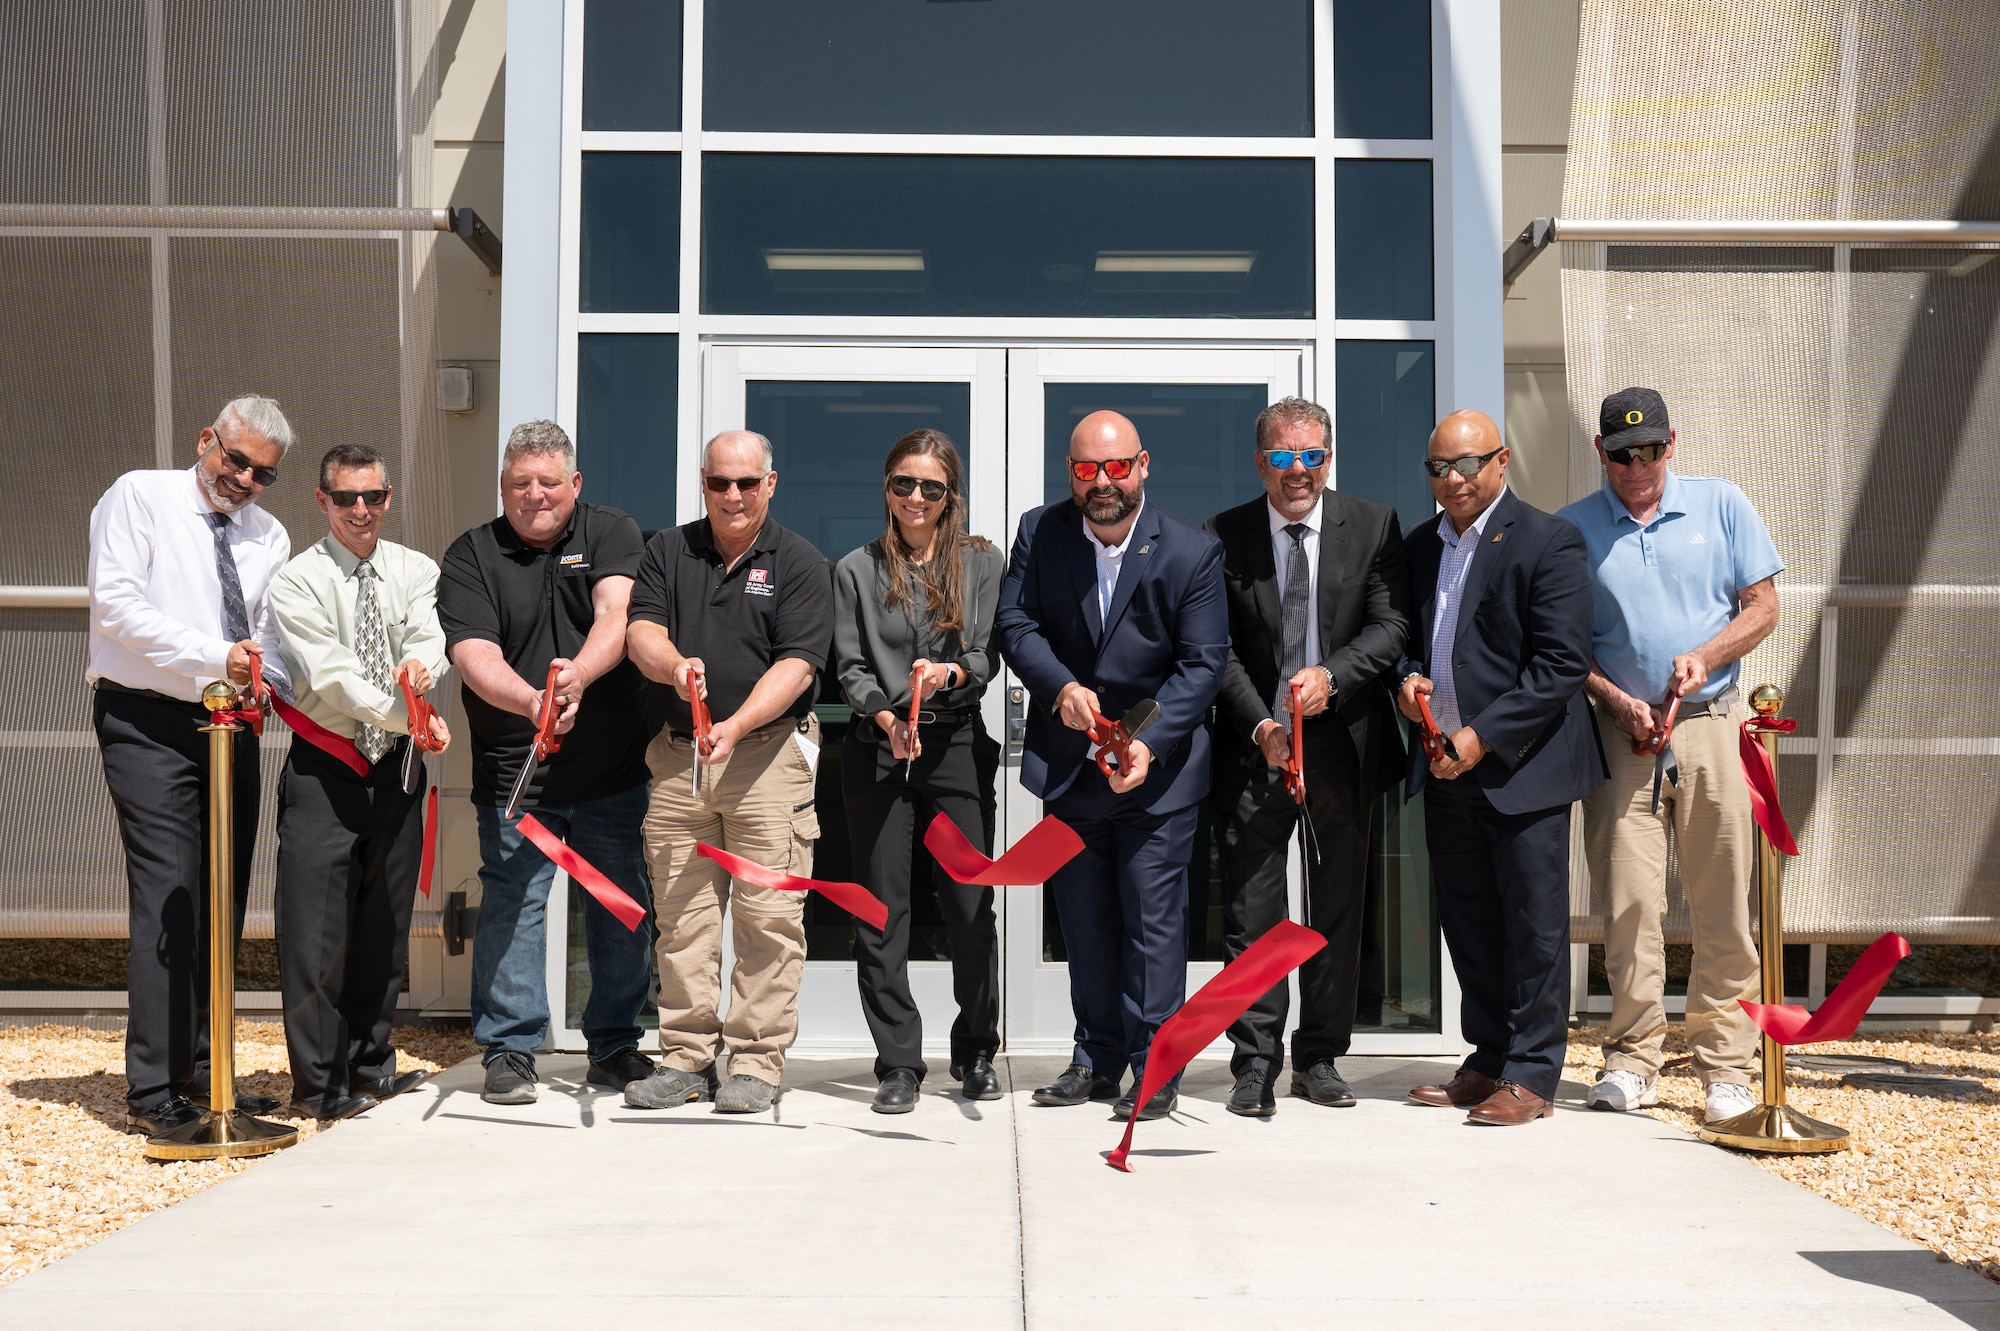 The 412th Electronic Warfare Group, 445th Test Squadron, celebrated the opening of the Digital Test and Training Range facility enabled by the Joint Simulation Environment during a ribbon-cutting ceremony May 8. The $34.4 million-dollar, state-of-the-art facility located on Edwards Air Force Base, California, will provide high-end modeling and simulation capabilities for the United States Air Force.